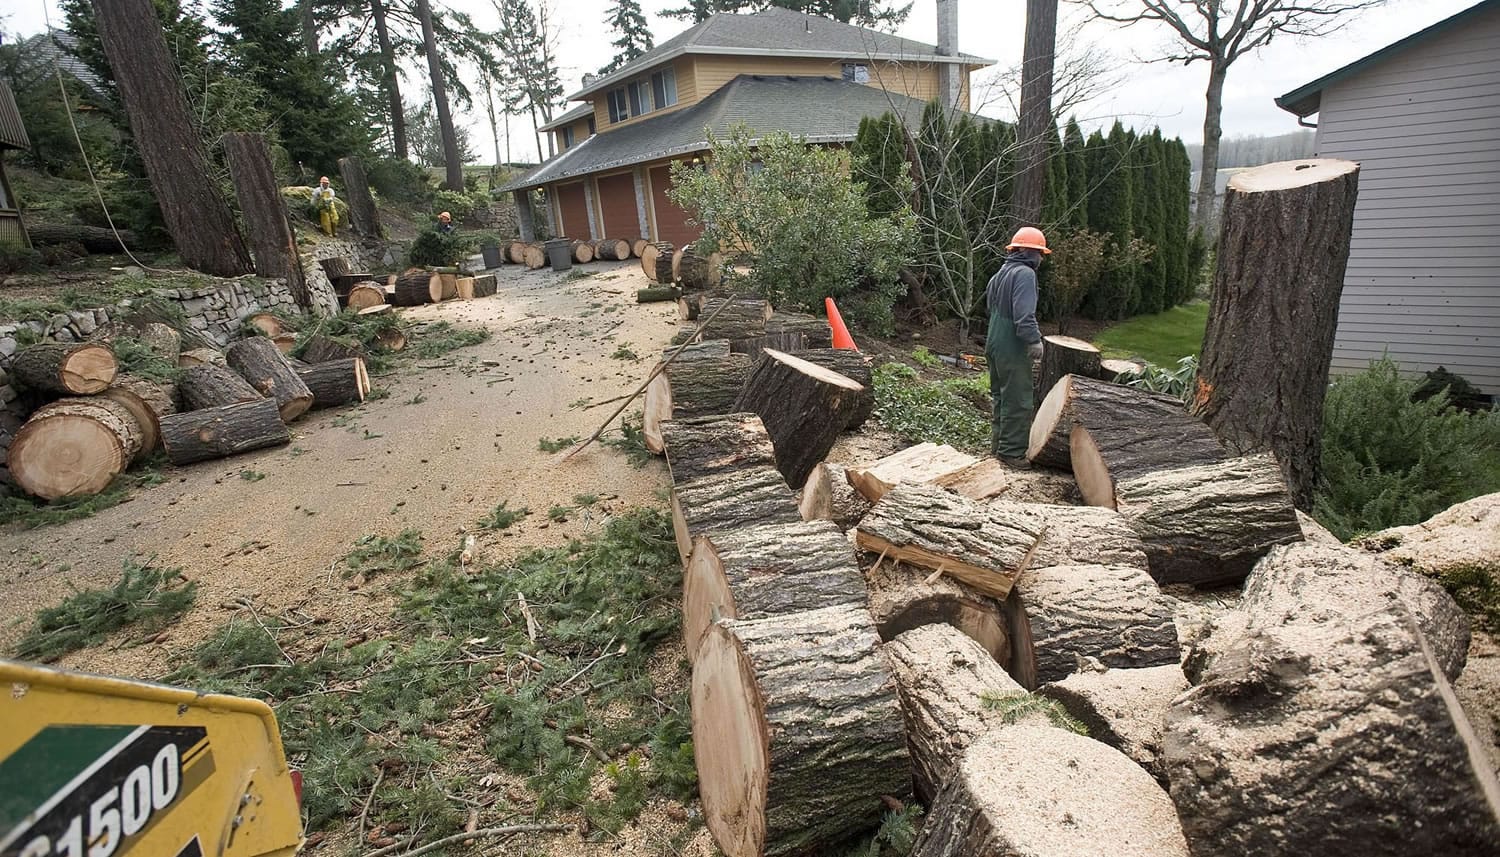 A crew from Pa's Tree Service turns a downed tree into next year's firewood.